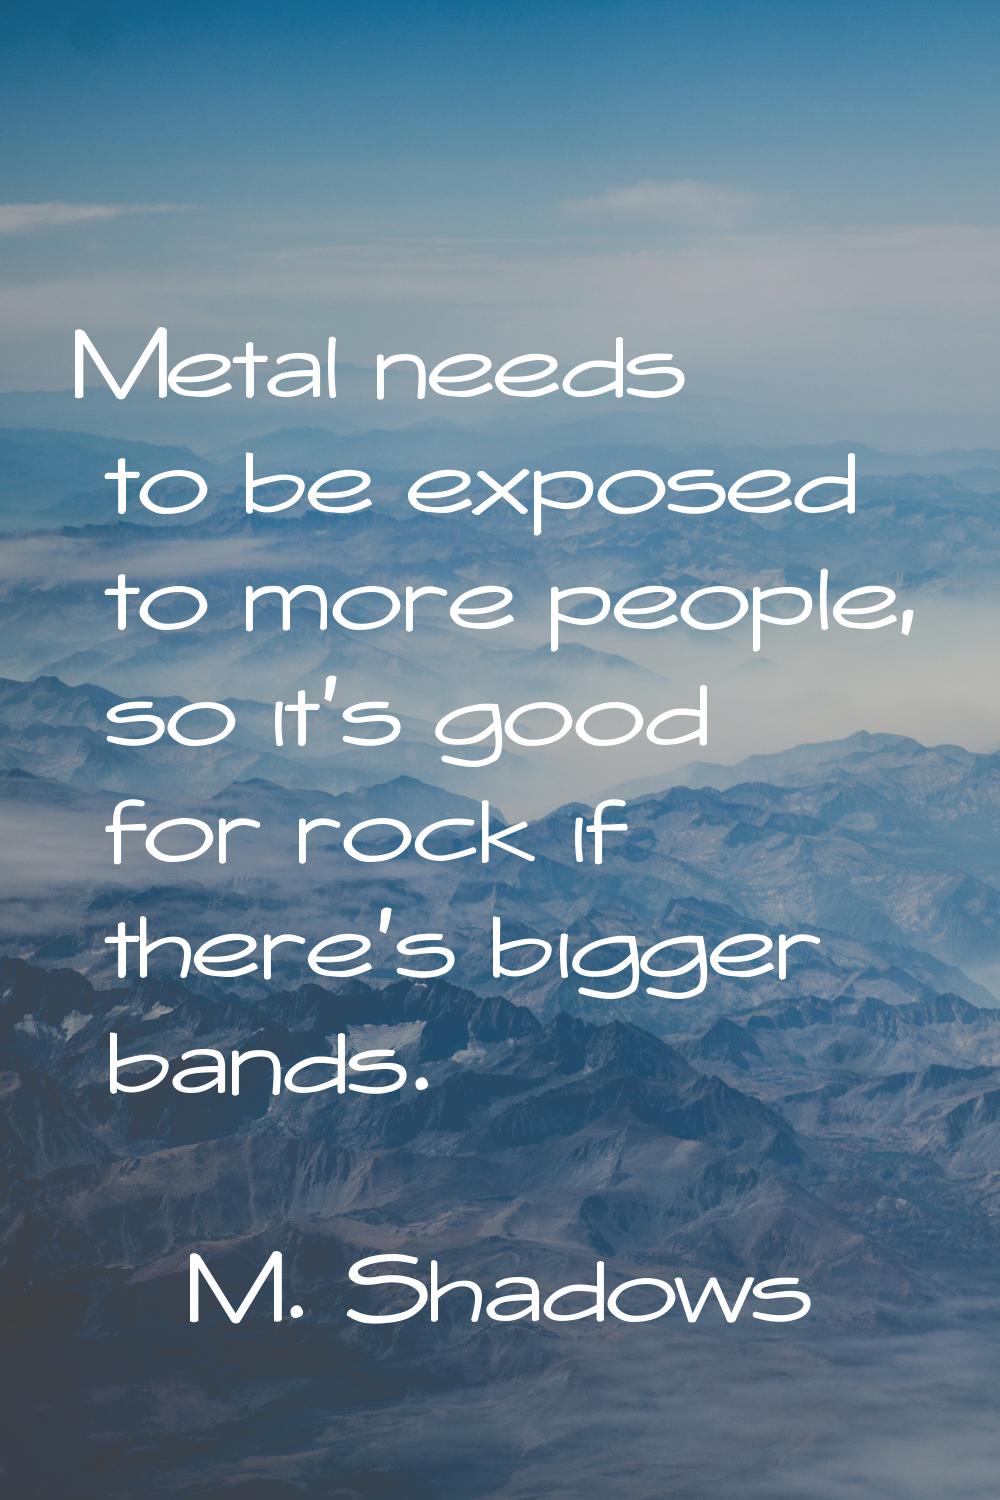 Metal needs to be exposed to more people, so it's good for rock if there's bigger bands.